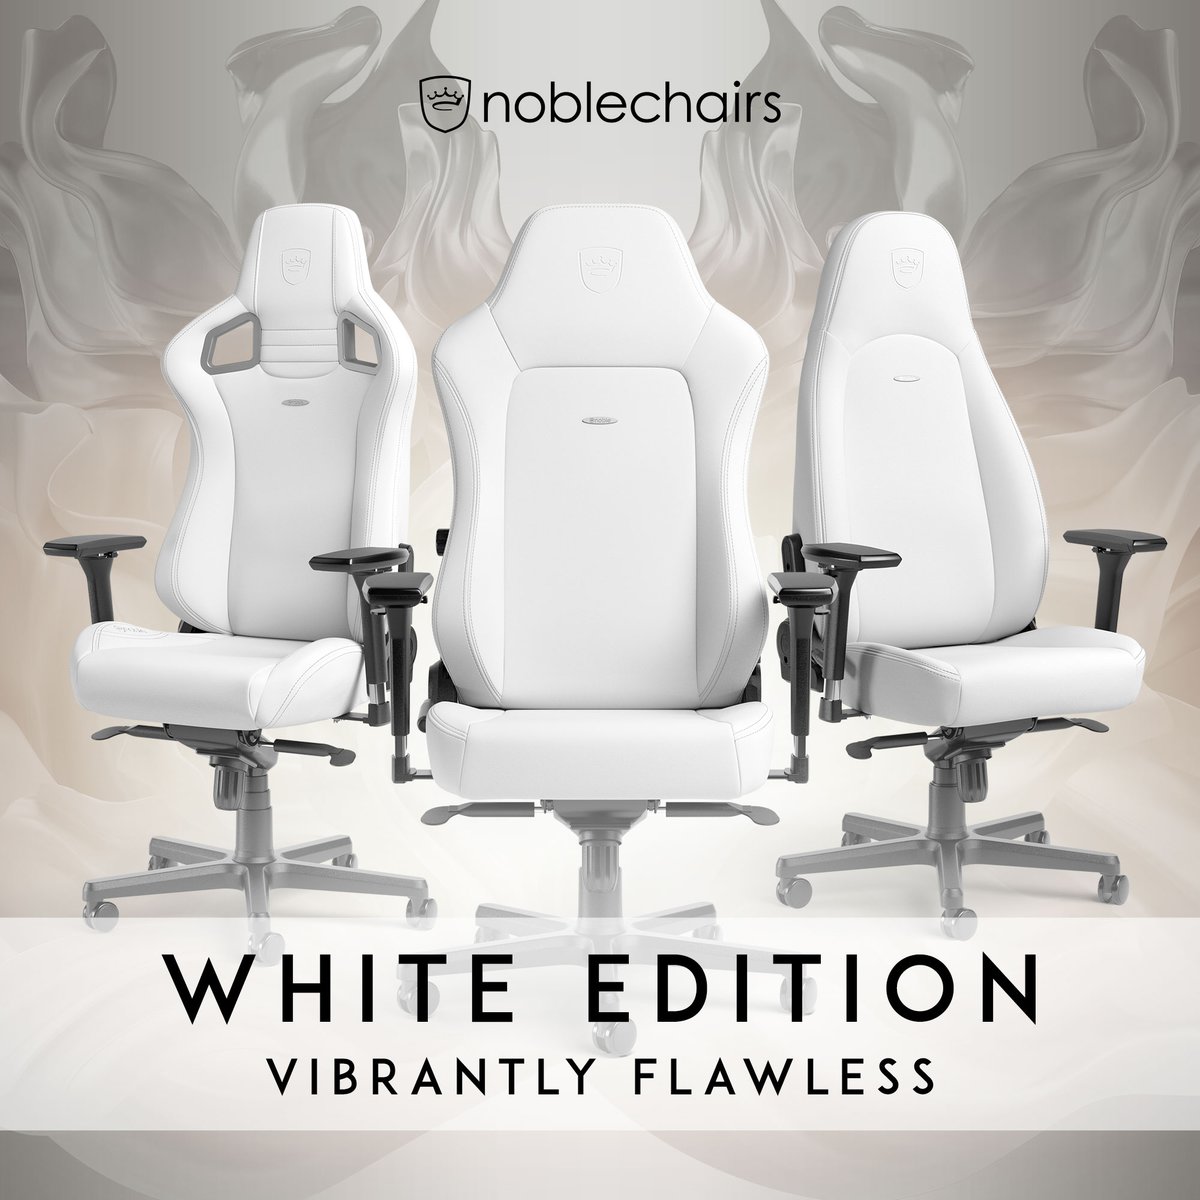 noblechairs、完全ホワイト仕様のゲーミングチェア「WHITE EDITION